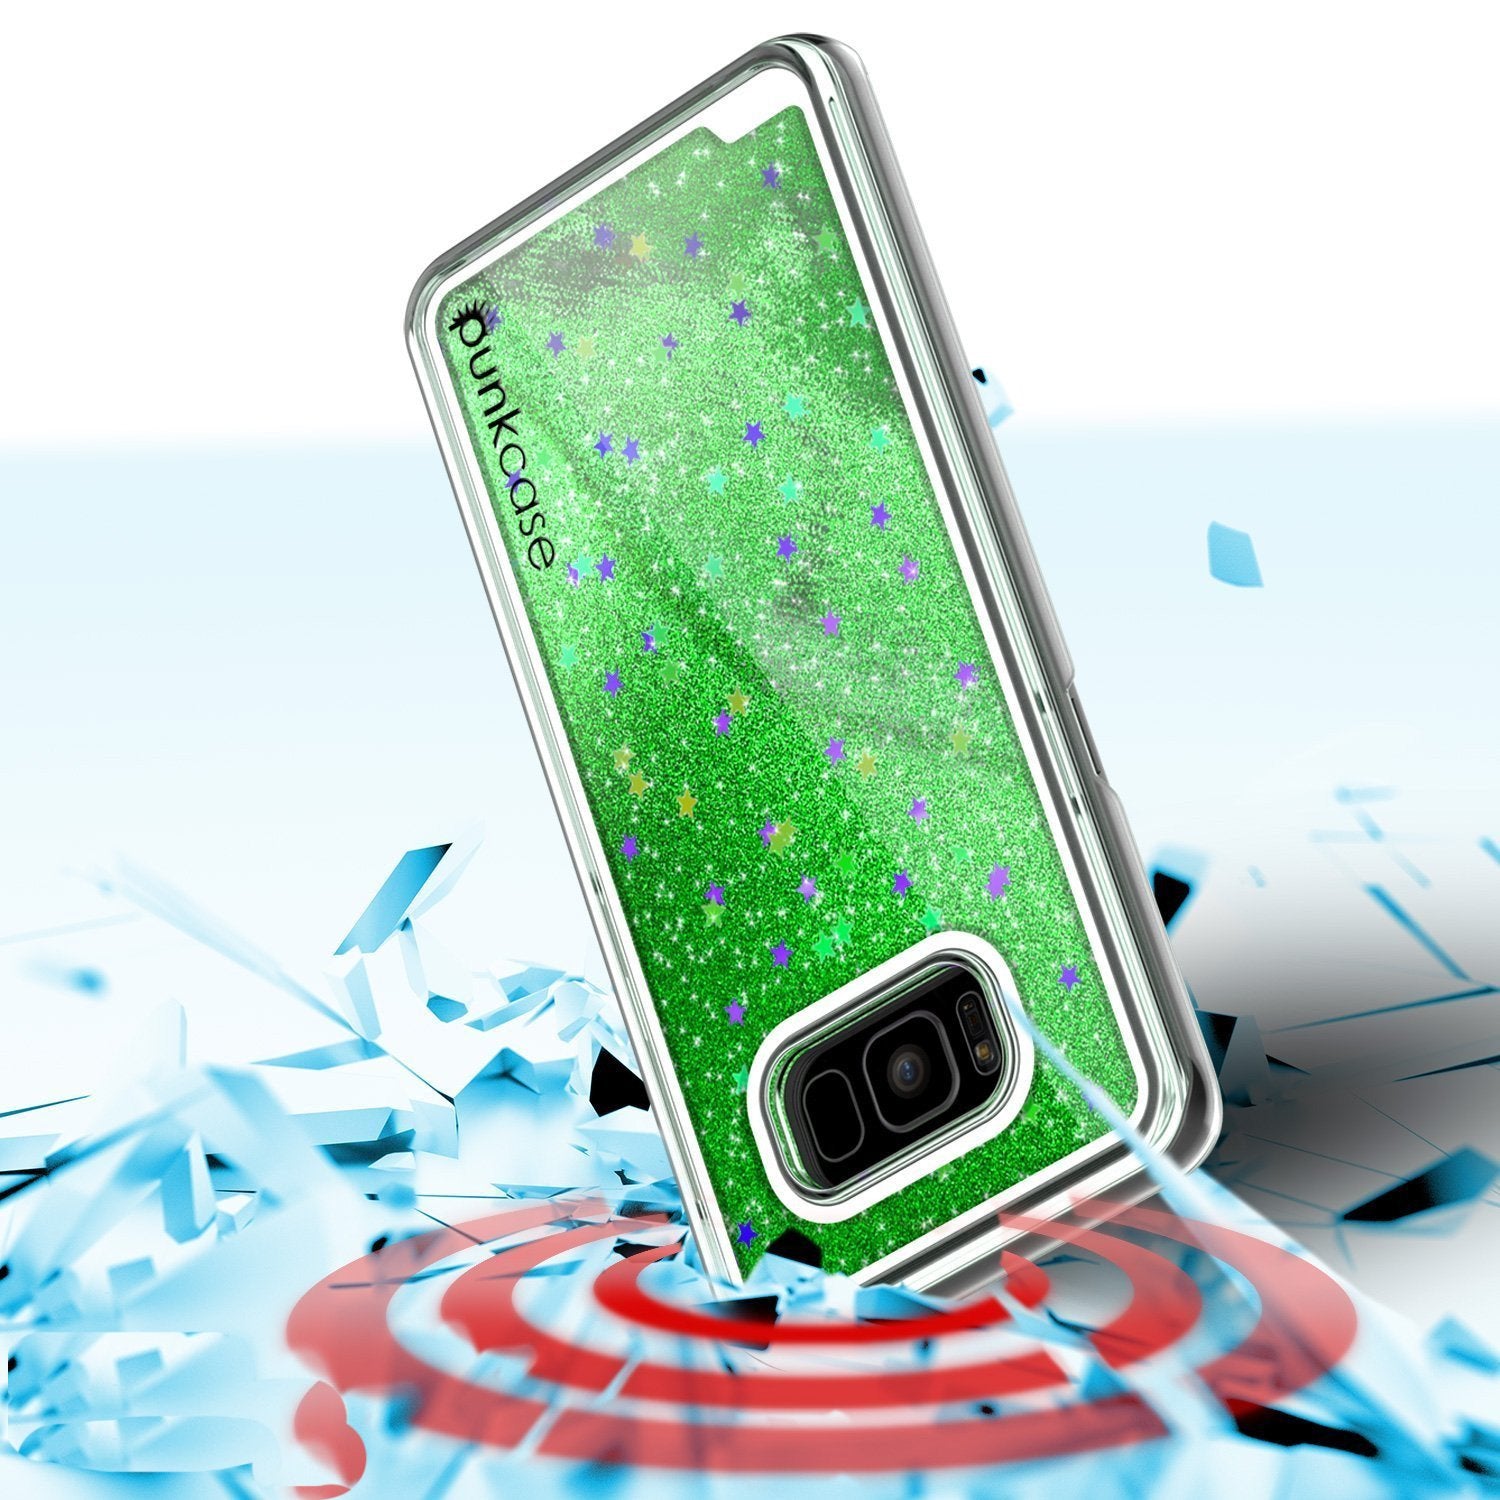 Galaxy S8 Case, Punkcase Liquid Green Series Protective Dual Layer Floating Glitter Cover - PunkCase NZ